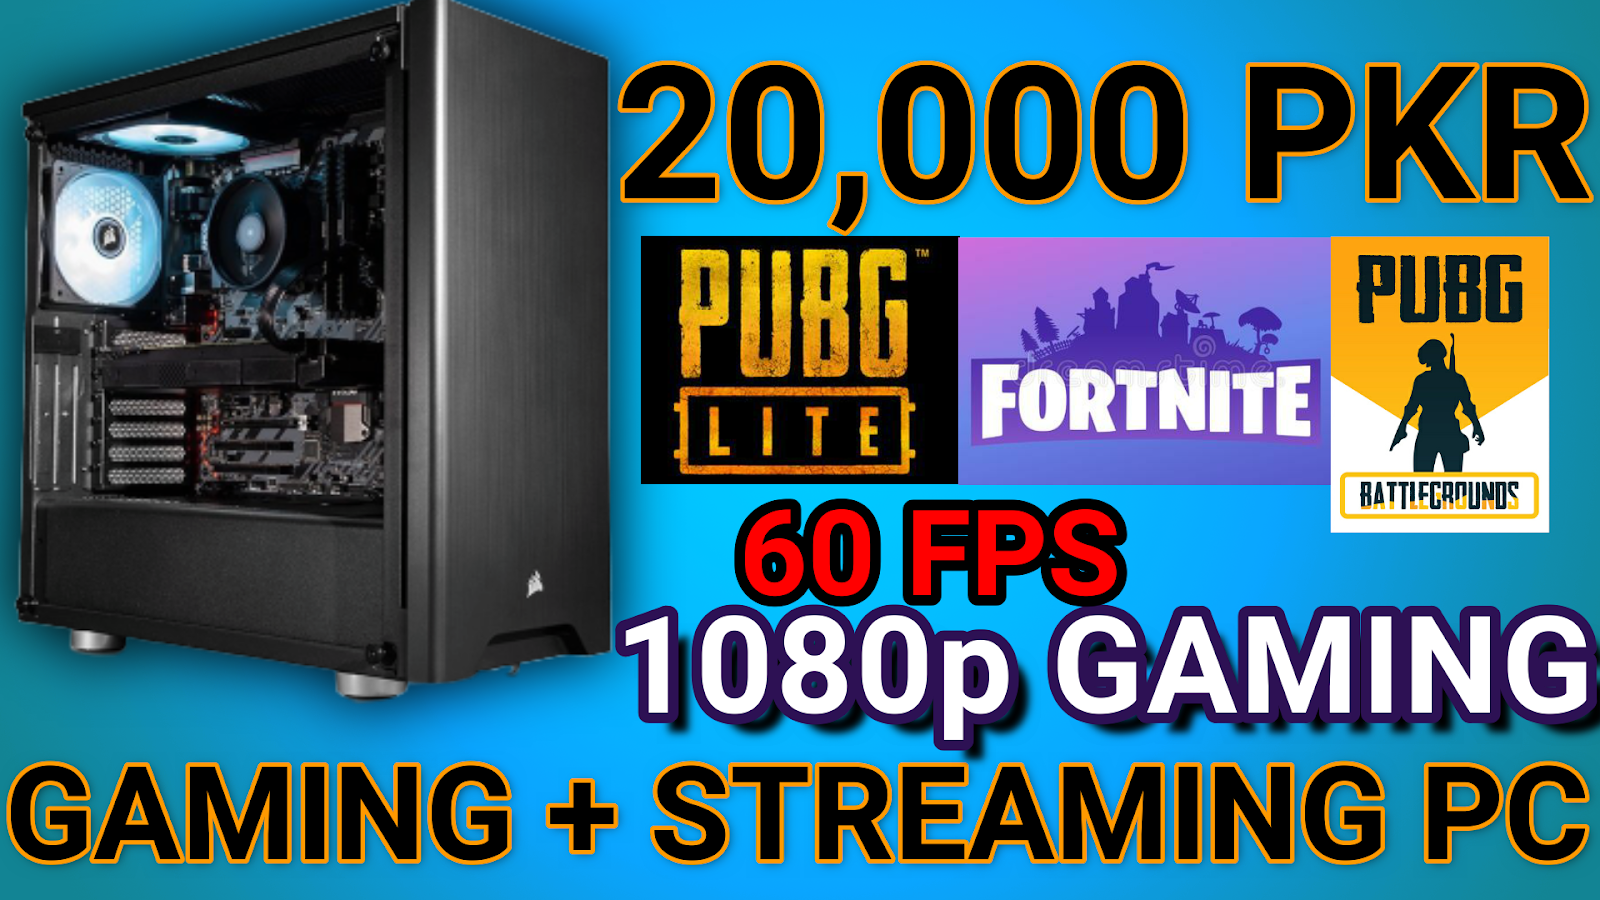 Wooden Best Gaming Pc Build Under 35K for Streaming